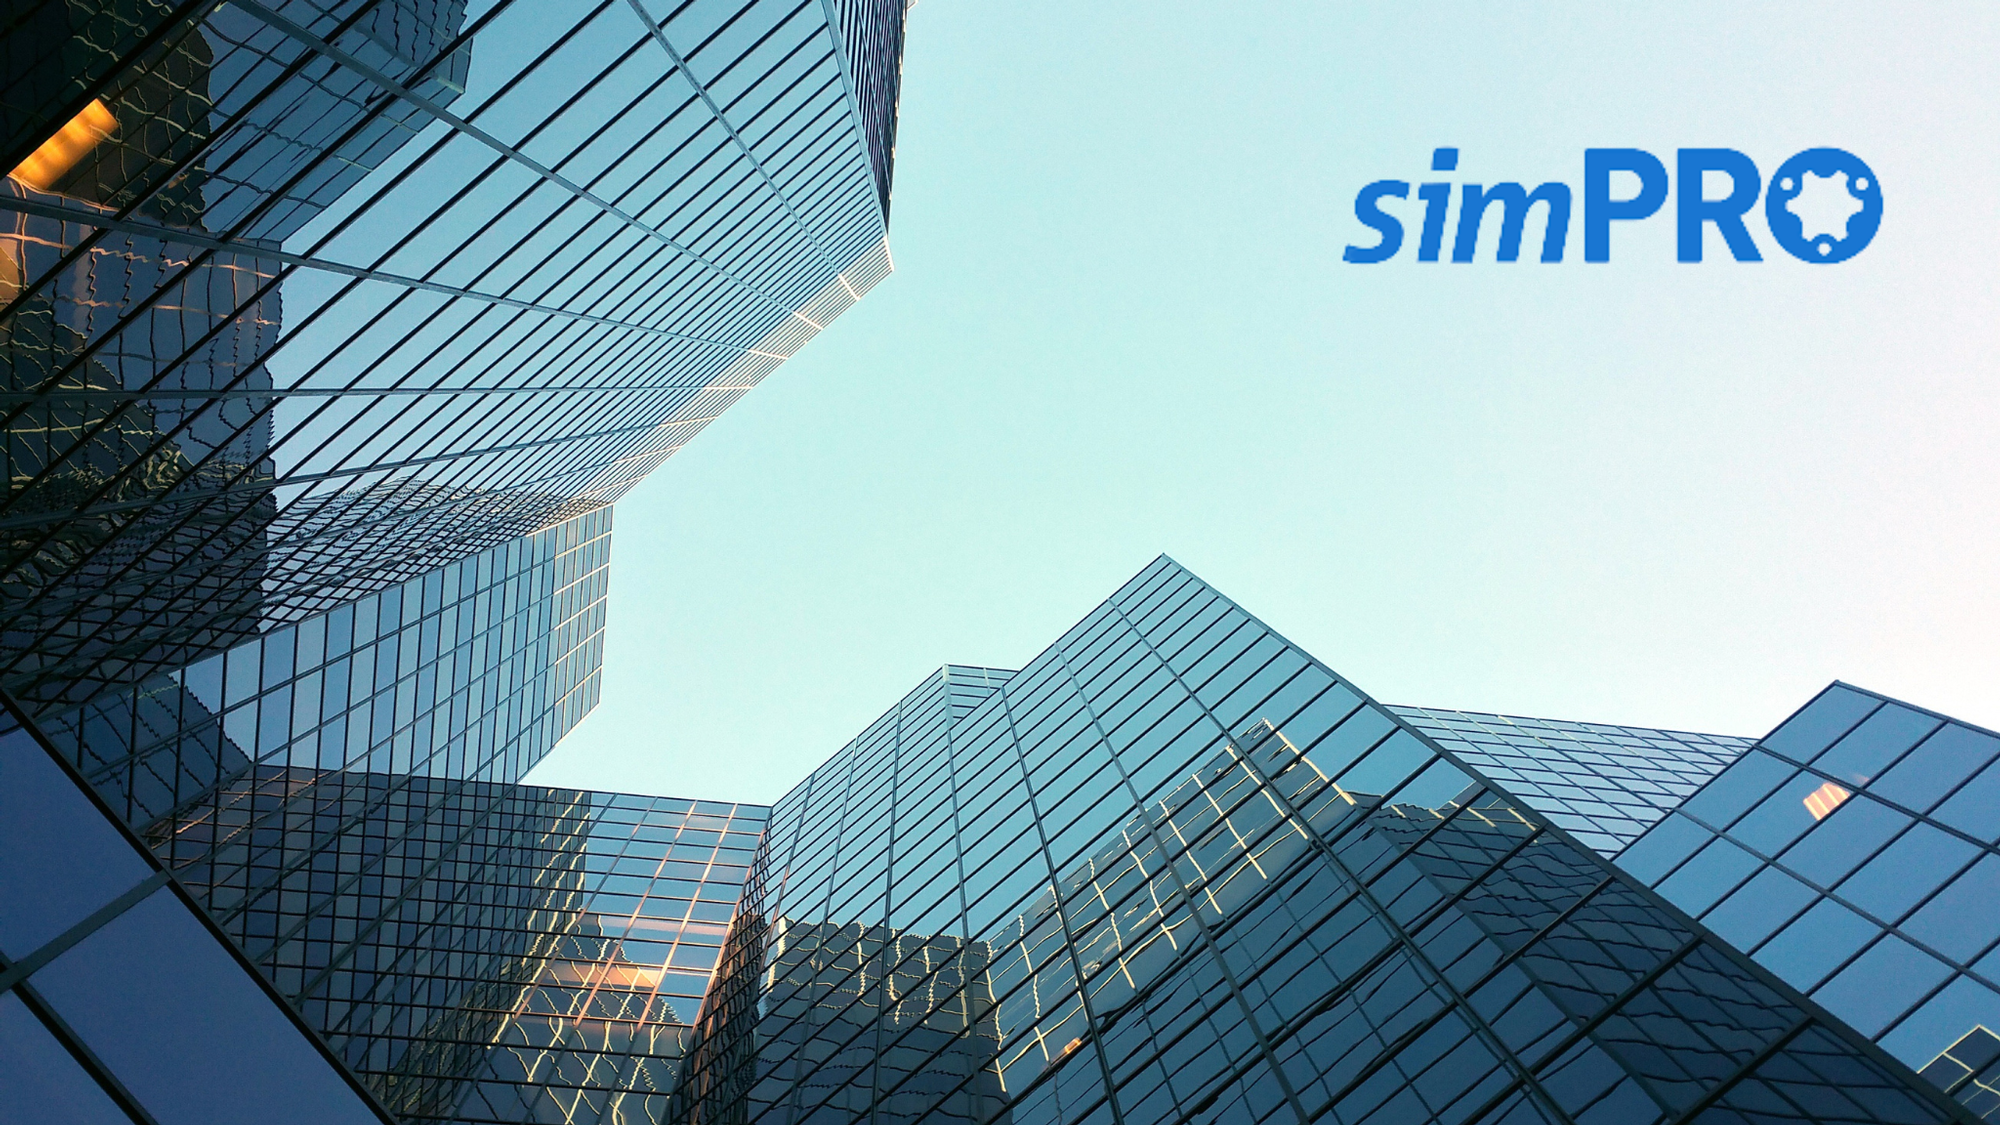 simPRO expands global footprint with new office openings